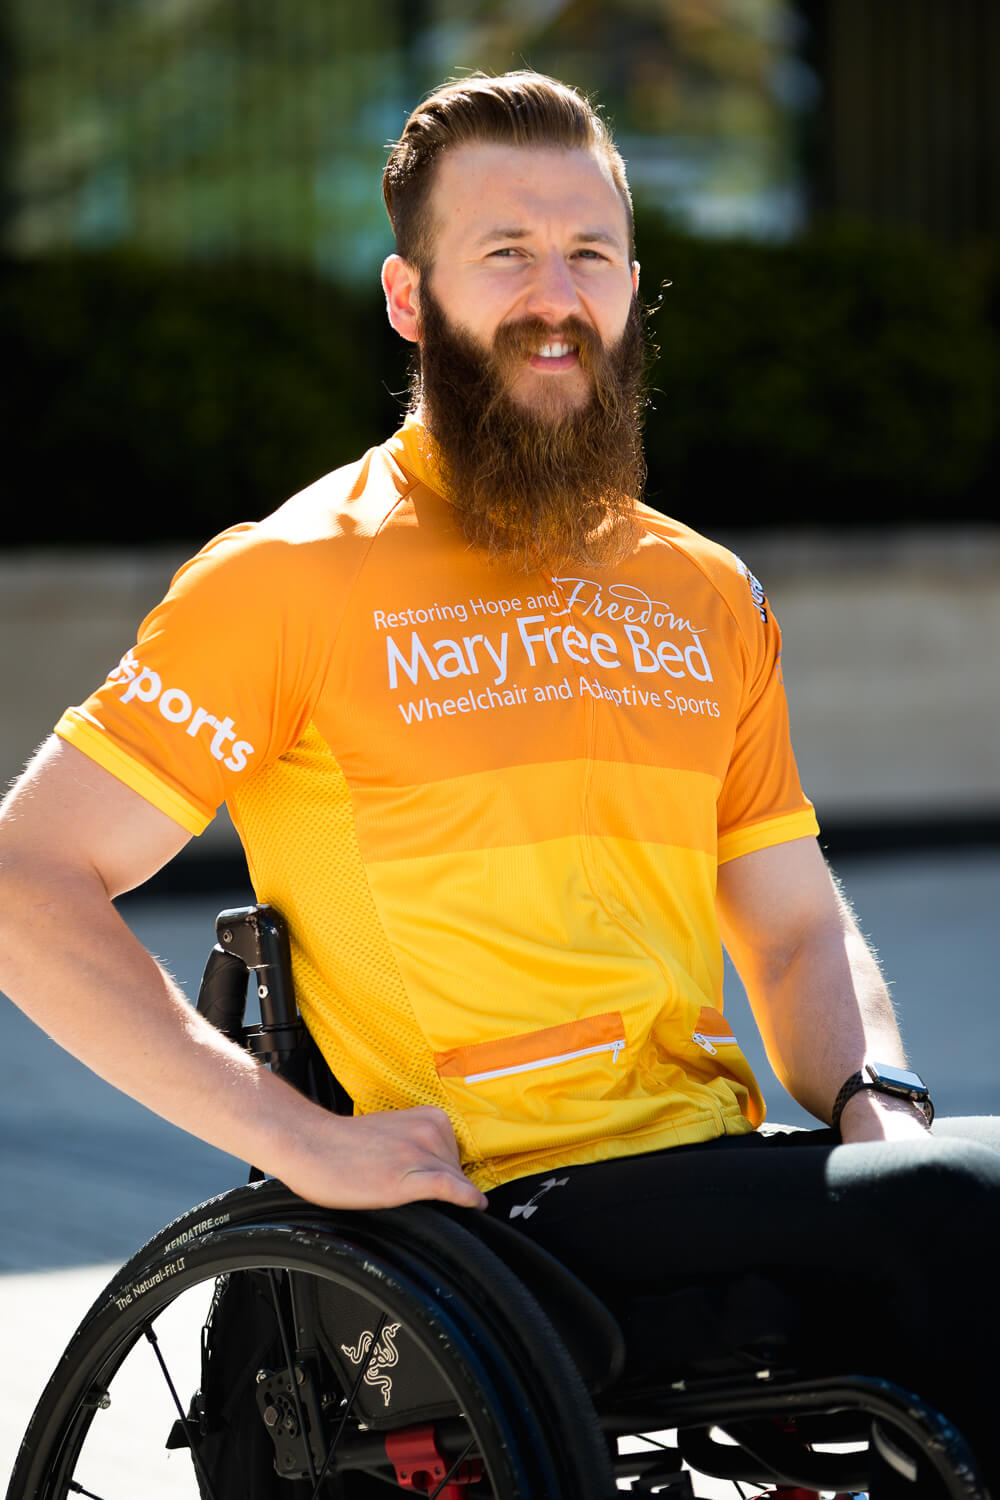 A young man is smiling. He is wearing an orange jersey that says Mary Free Bed Sports. He has red hair and a big beard, and is sitting in a black wheelchair